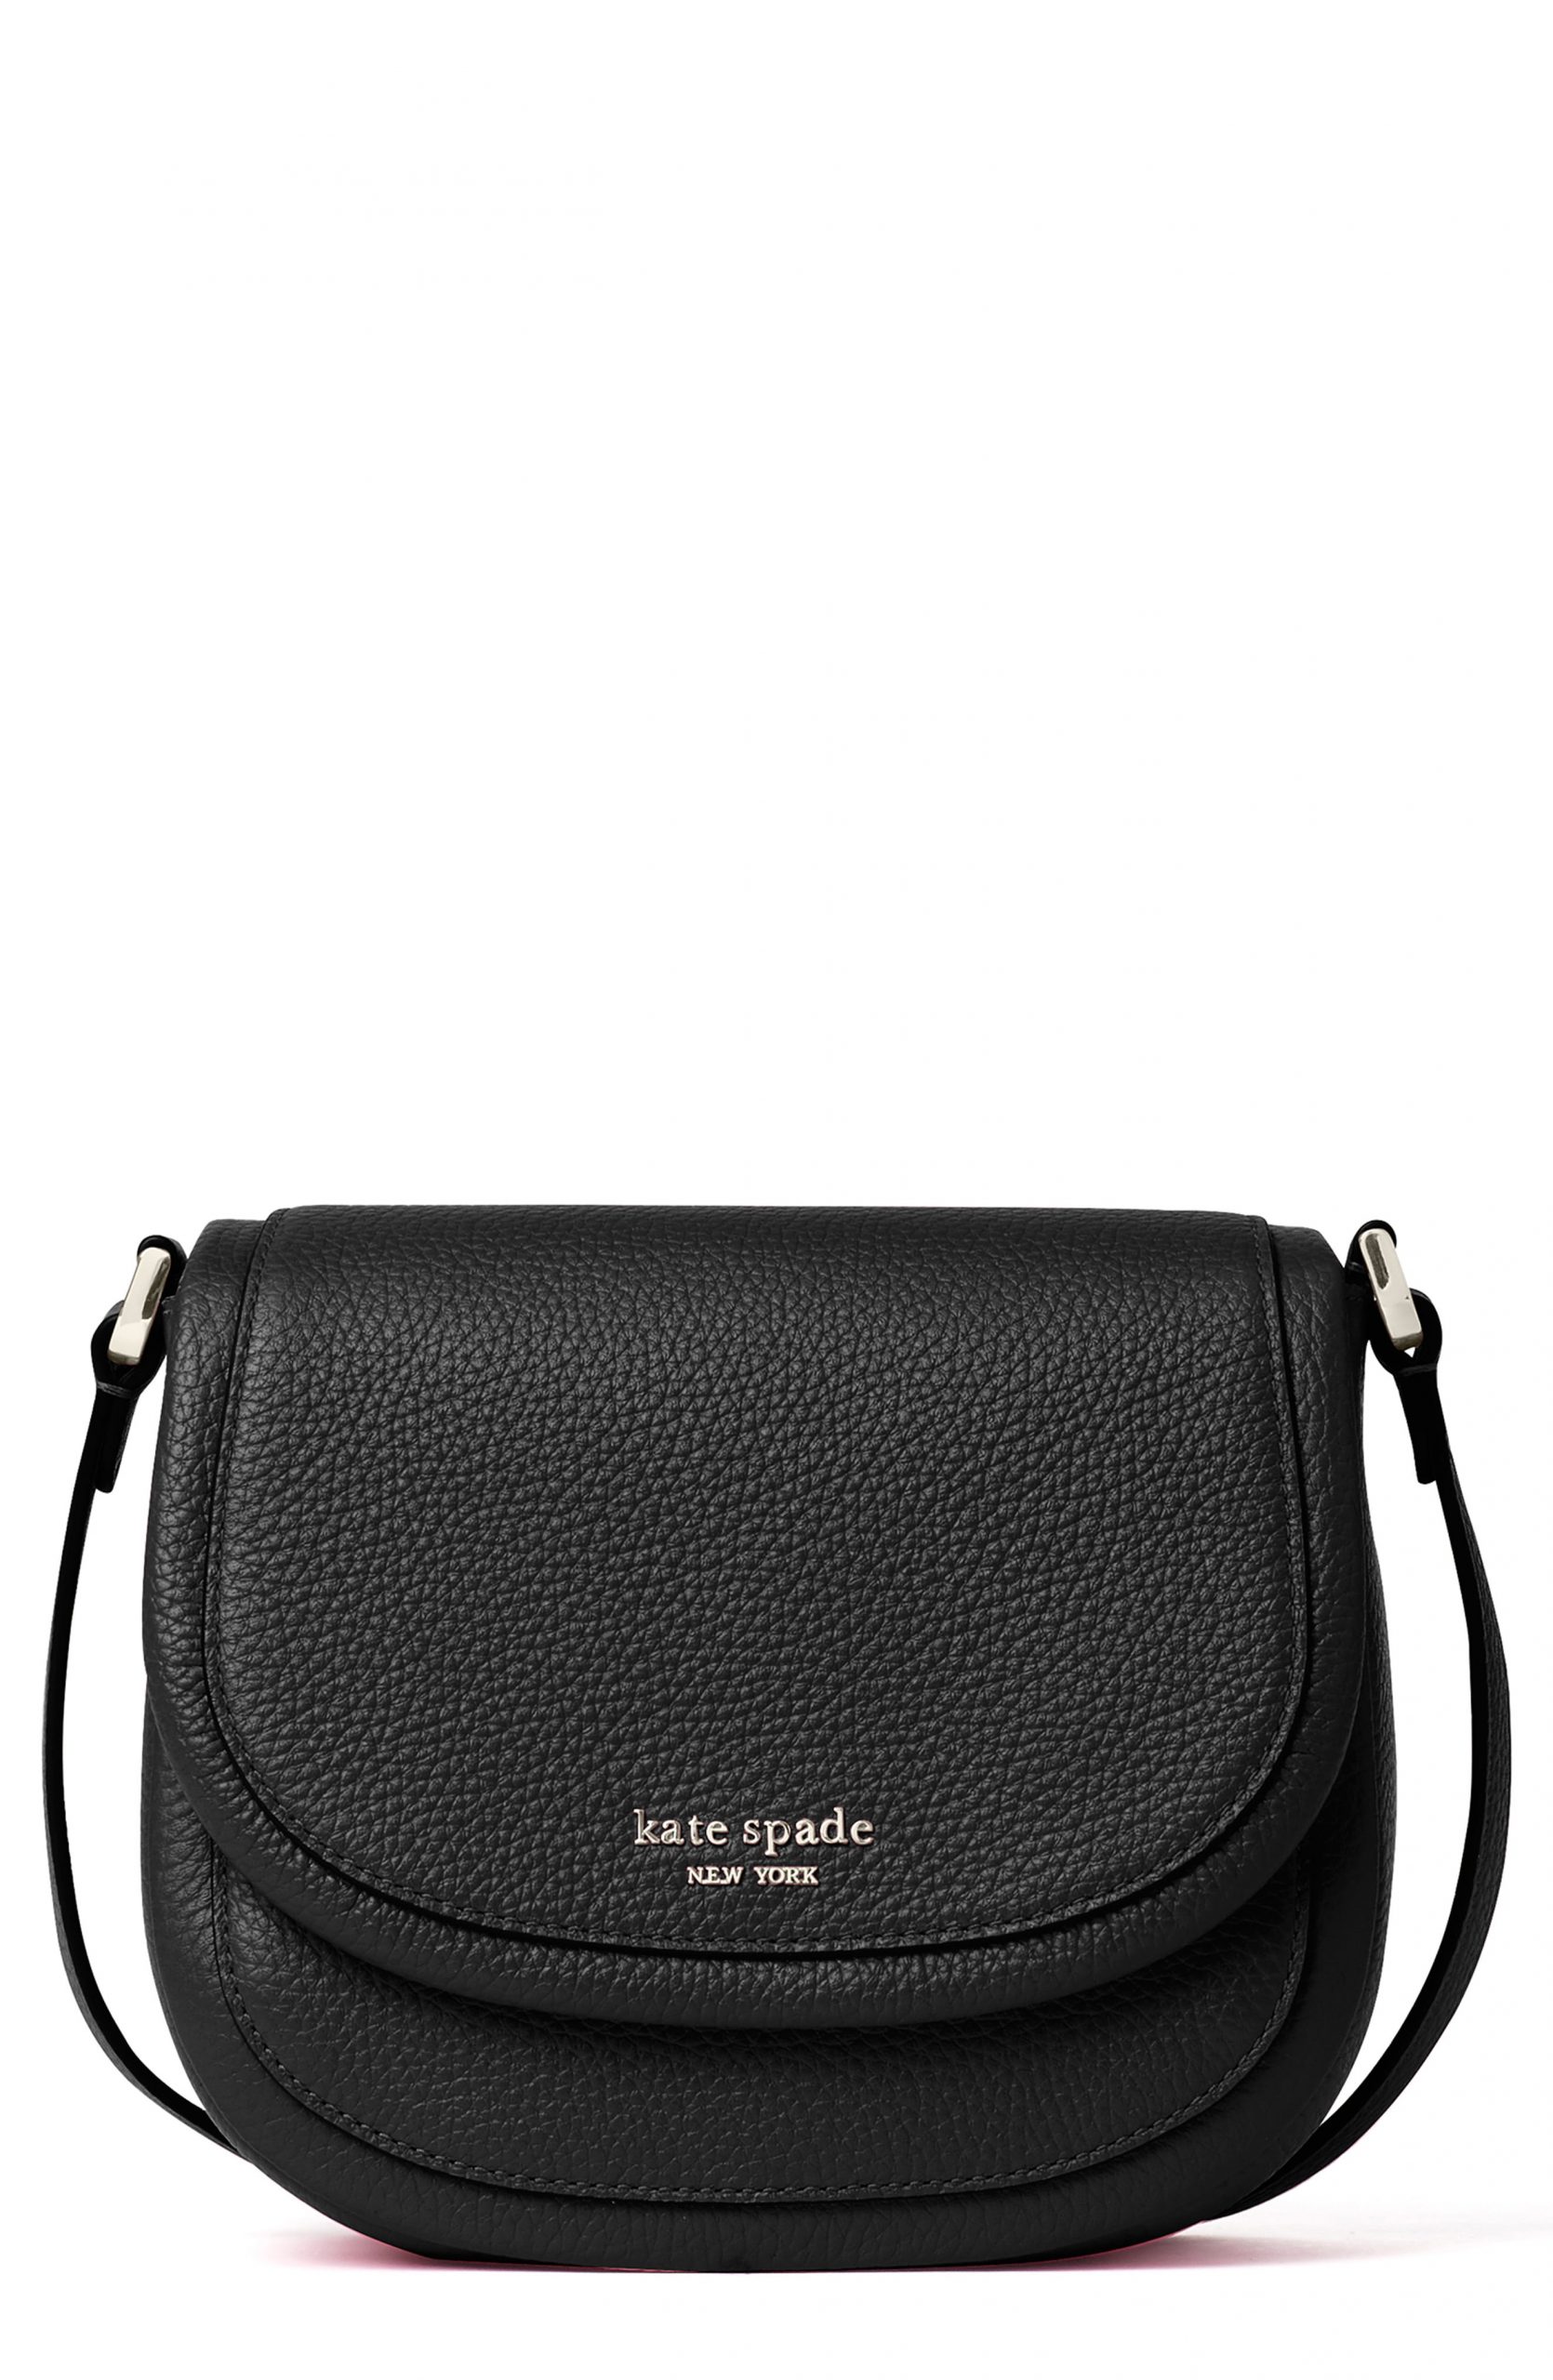 2022-23 AW(秋冬) KATE SPADE Small Satchel ☆お求めやすく価格改定